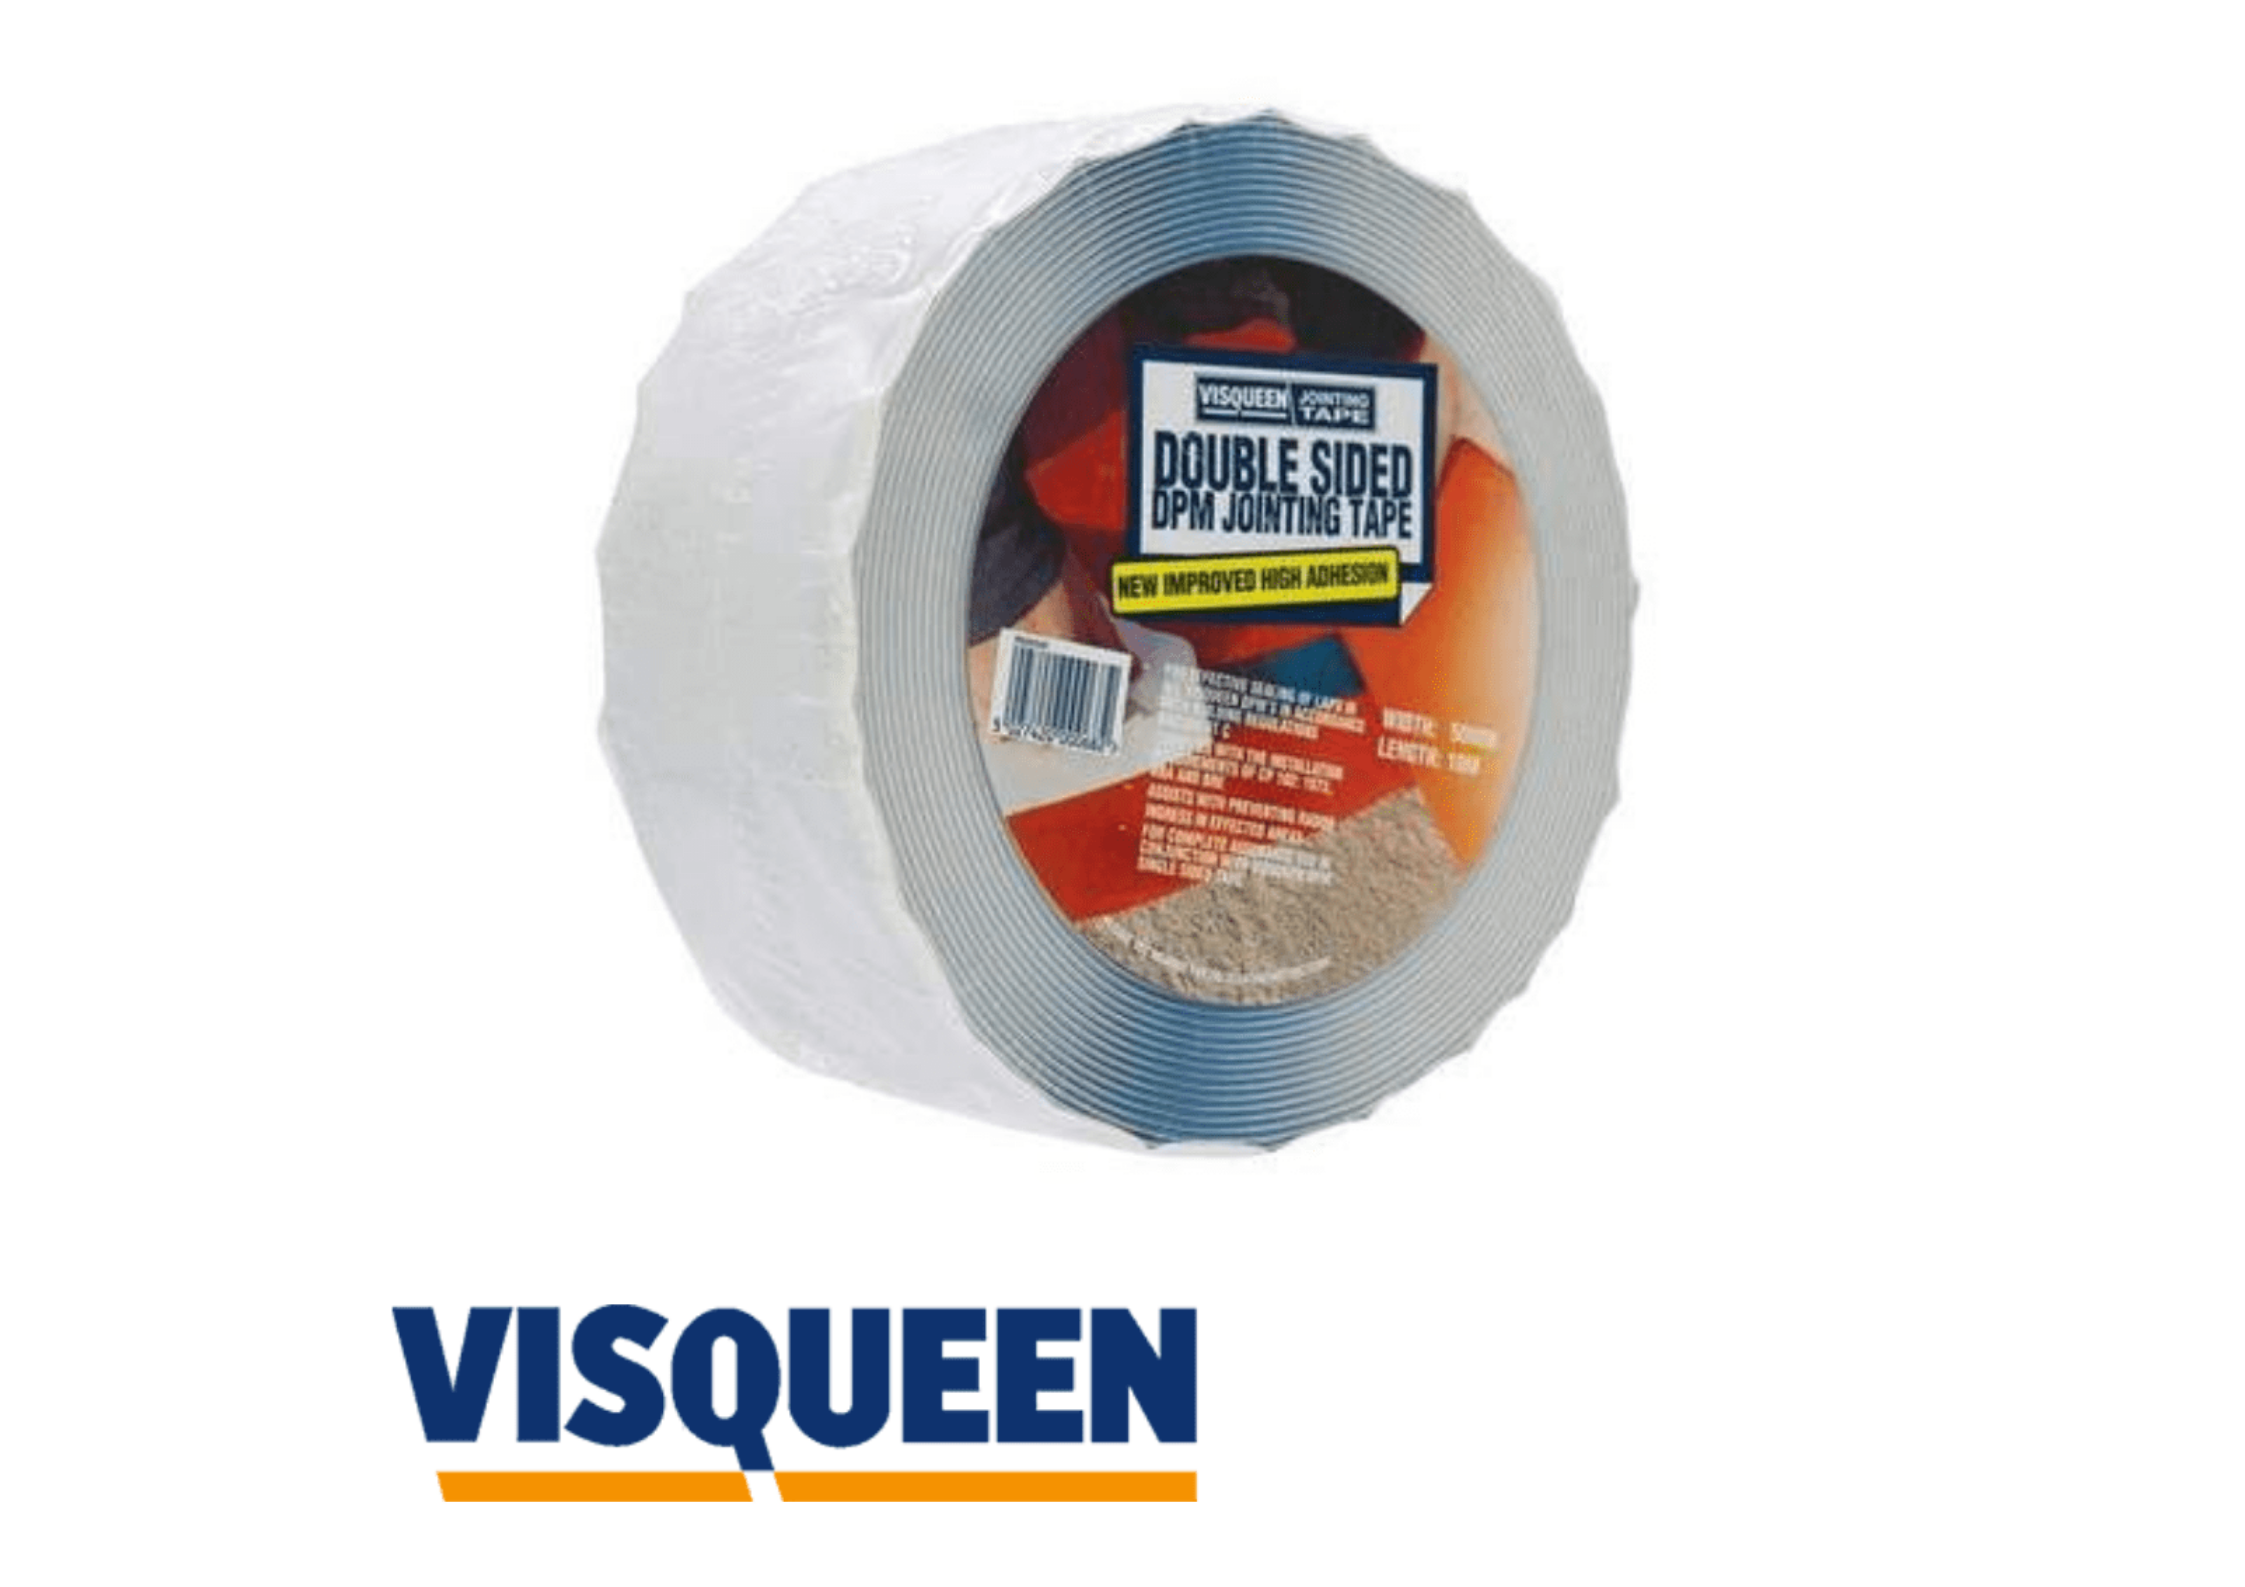 Visqueen Hardware Tape Visqueen Double Sided Jointing Tape 50mm x 10m